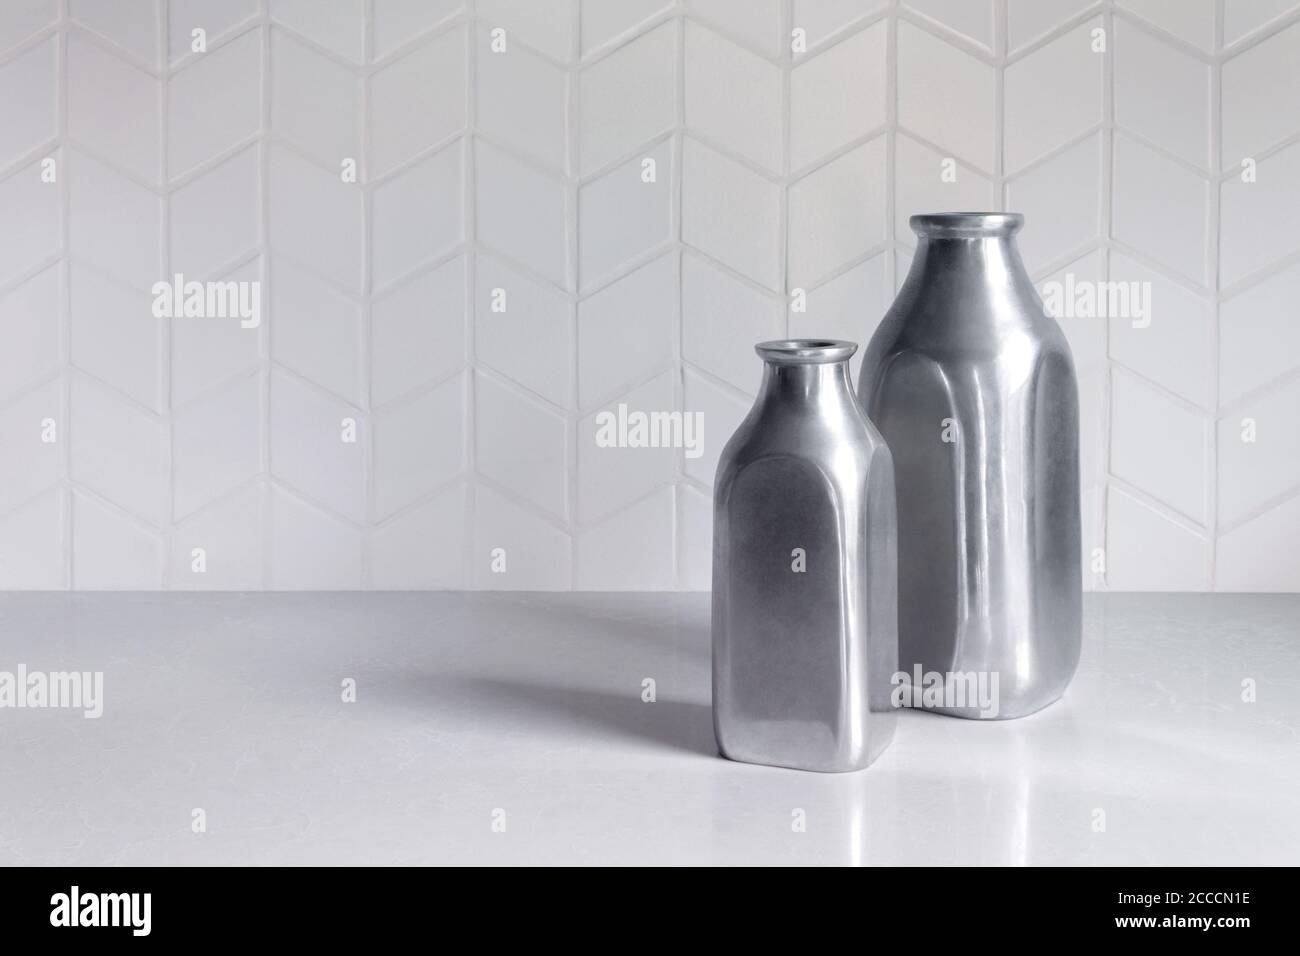 two empty silver colored metal bottles or vases on a white counter with a white chevron tile pattern backsplash with copy space Stock Photo